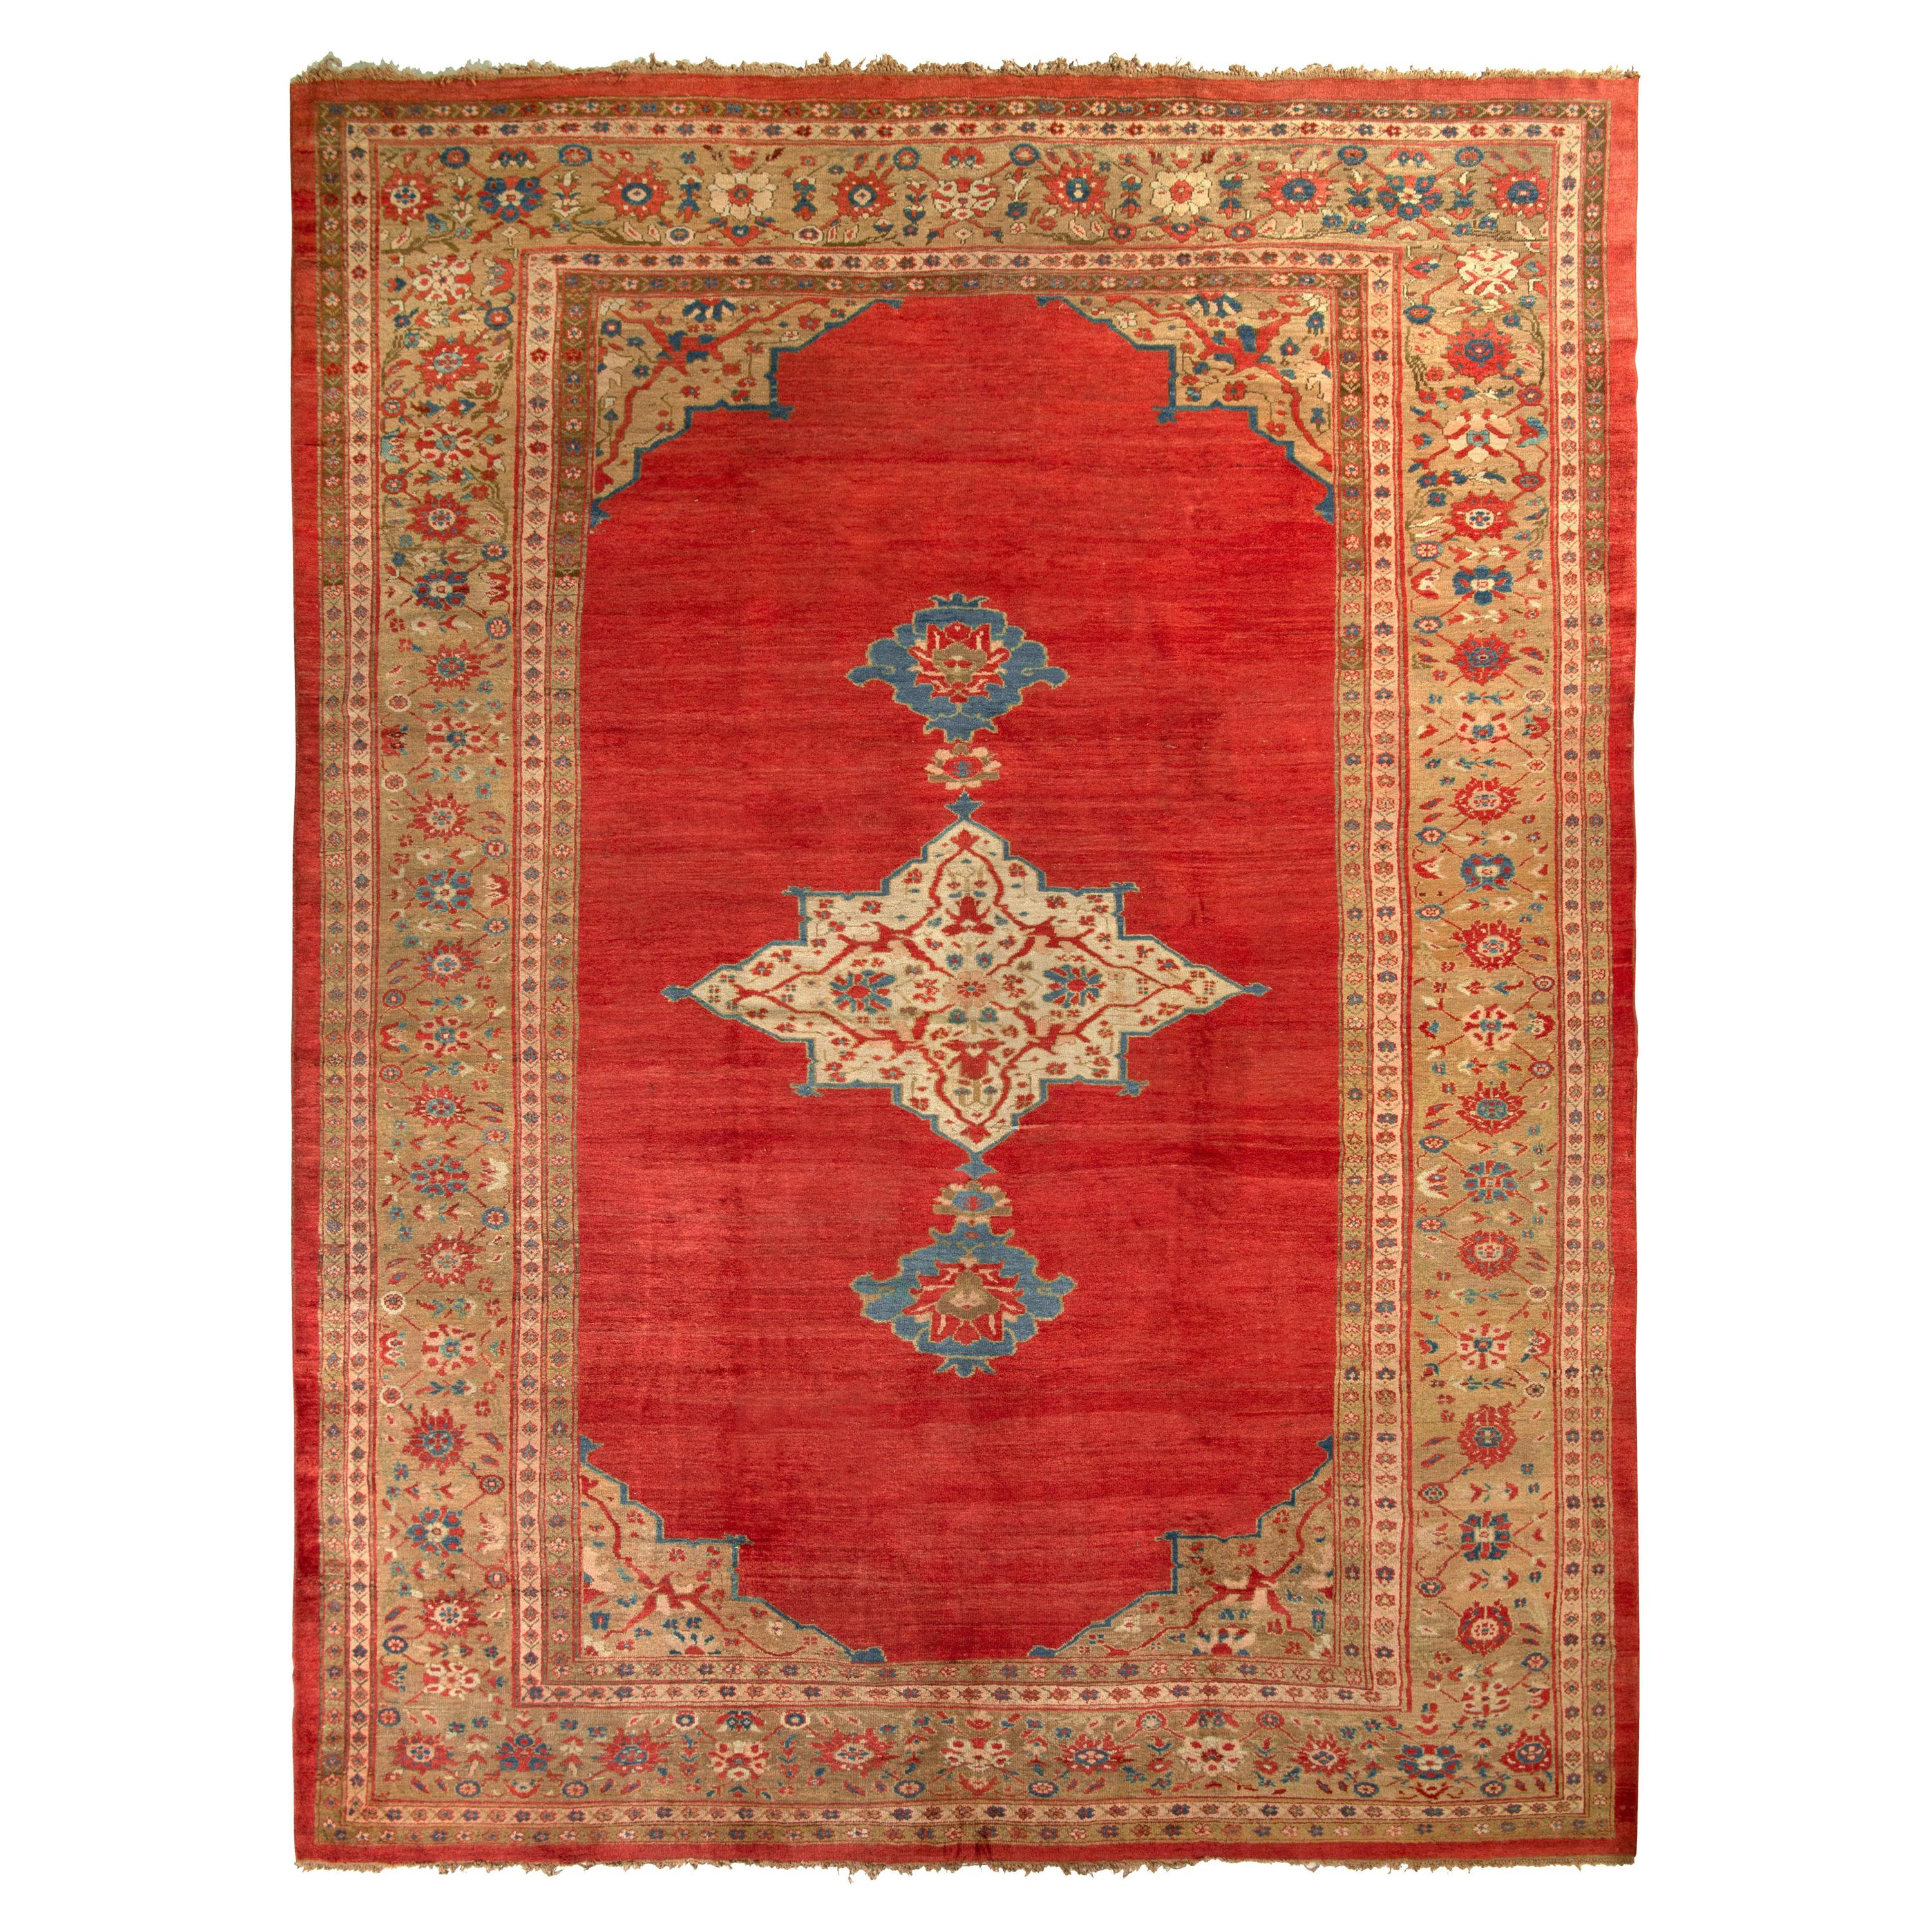 Antique Sultanabad Persian Rug in Red & Beige Medallion Pattern